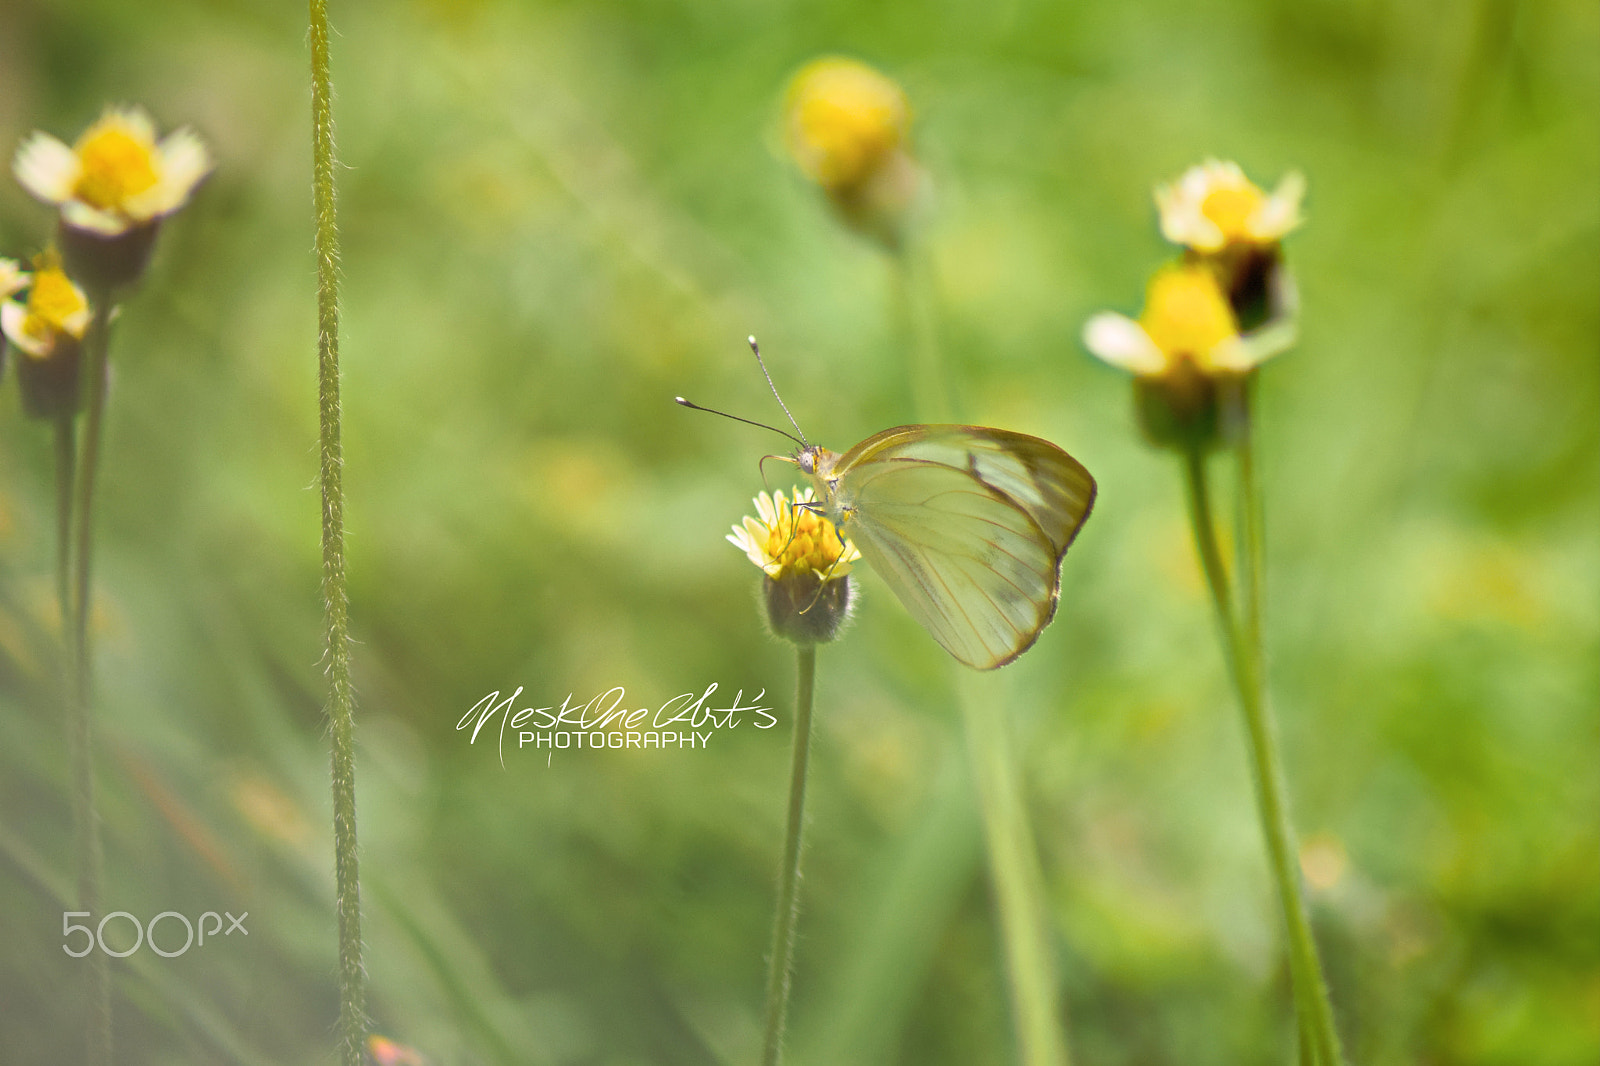 Nikon D5300 sample photo. The standing butterfly photography